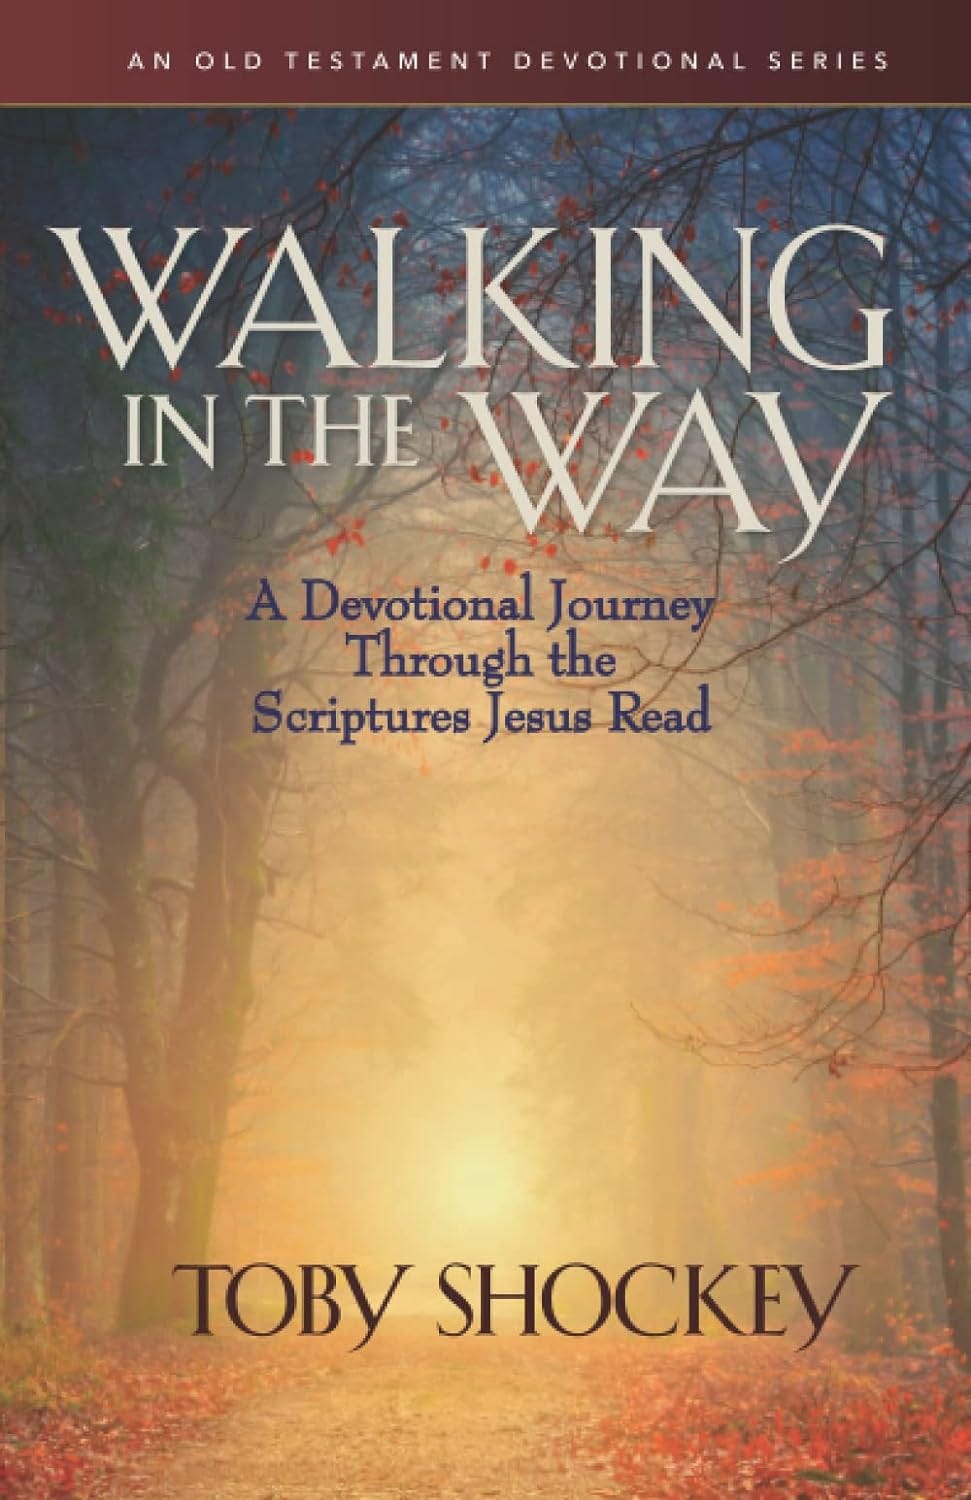 Image of the book cover to Walking in the Way by Toby Shockey.